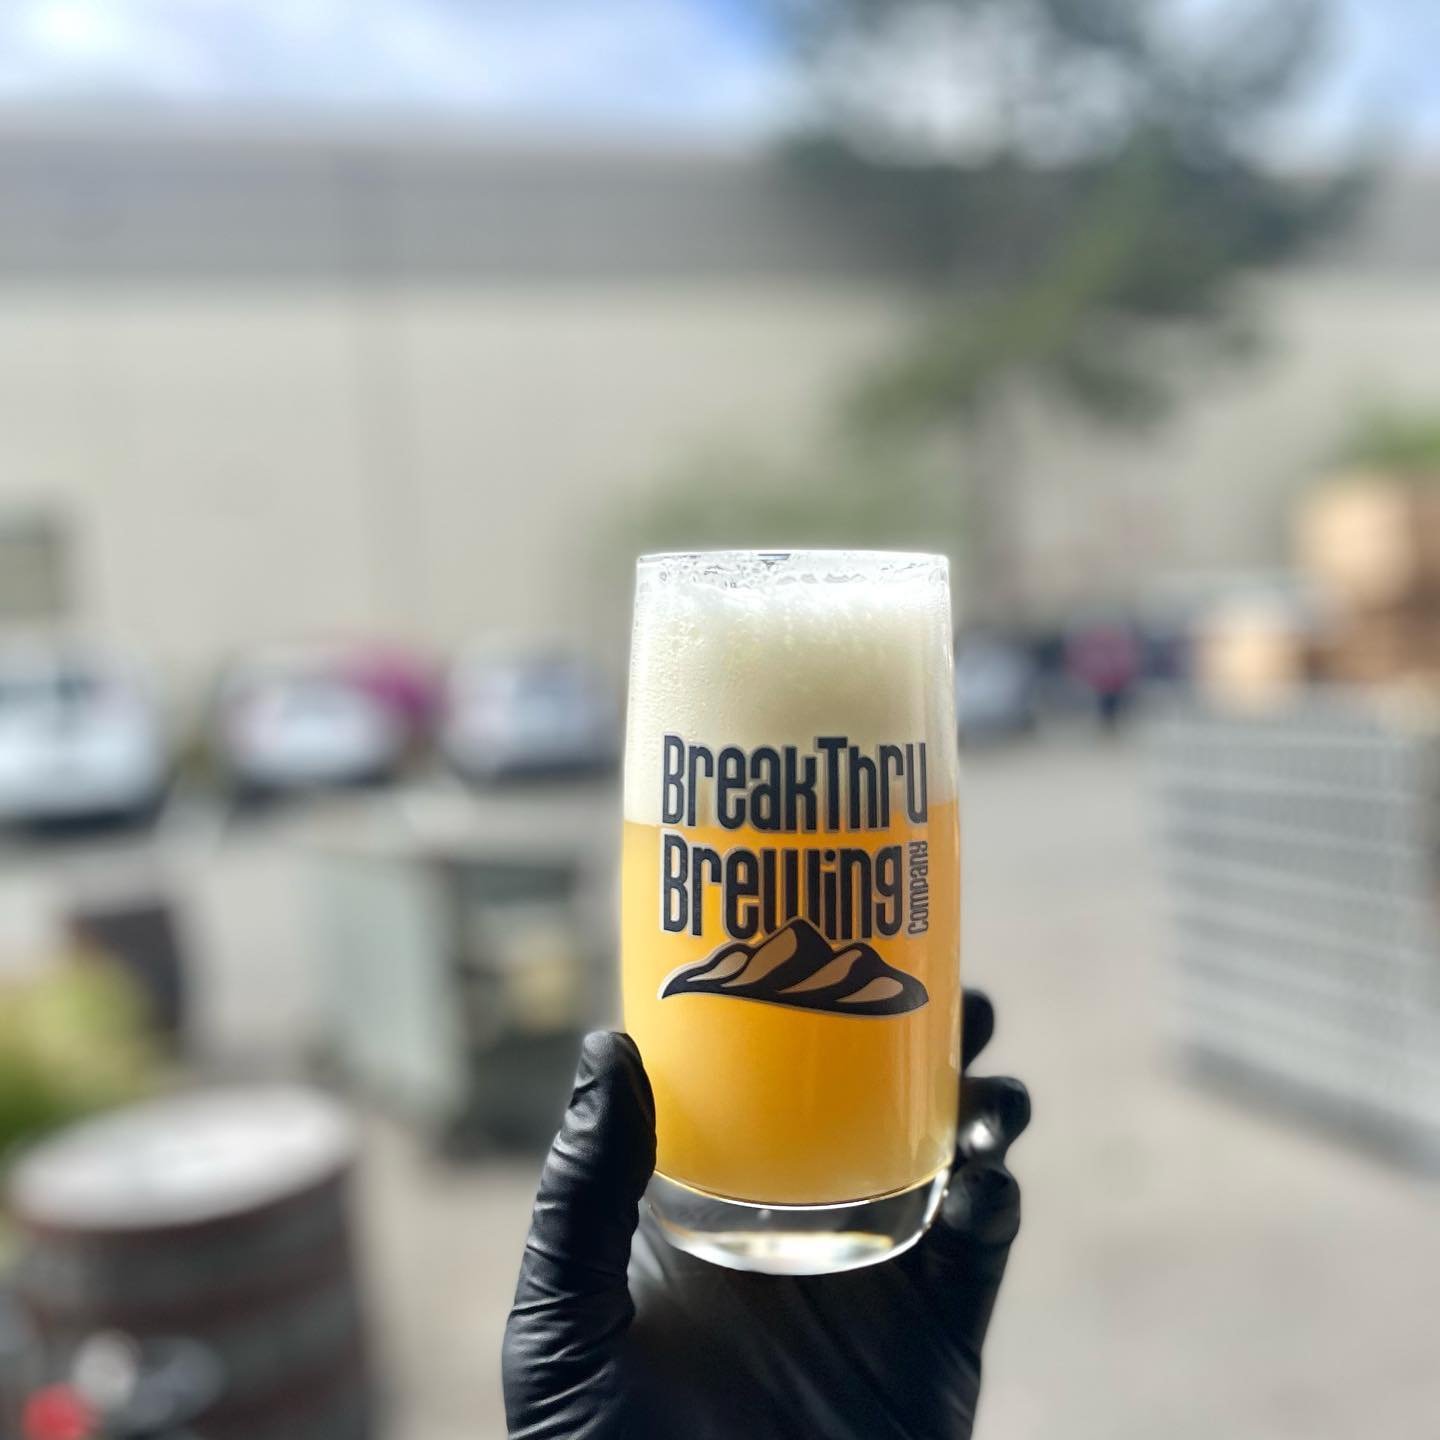 🚨Details for today&rsquo;s on-site release🚨 

📍 Stoup Brewing Ballard 
1108 NW 52nd St
Seattle, WA 98107

12pm doors open, limit ONE CASE PER PERSON PER BEER

Stoup has also been generous enough to allow on site consumption of these new BreakThru 